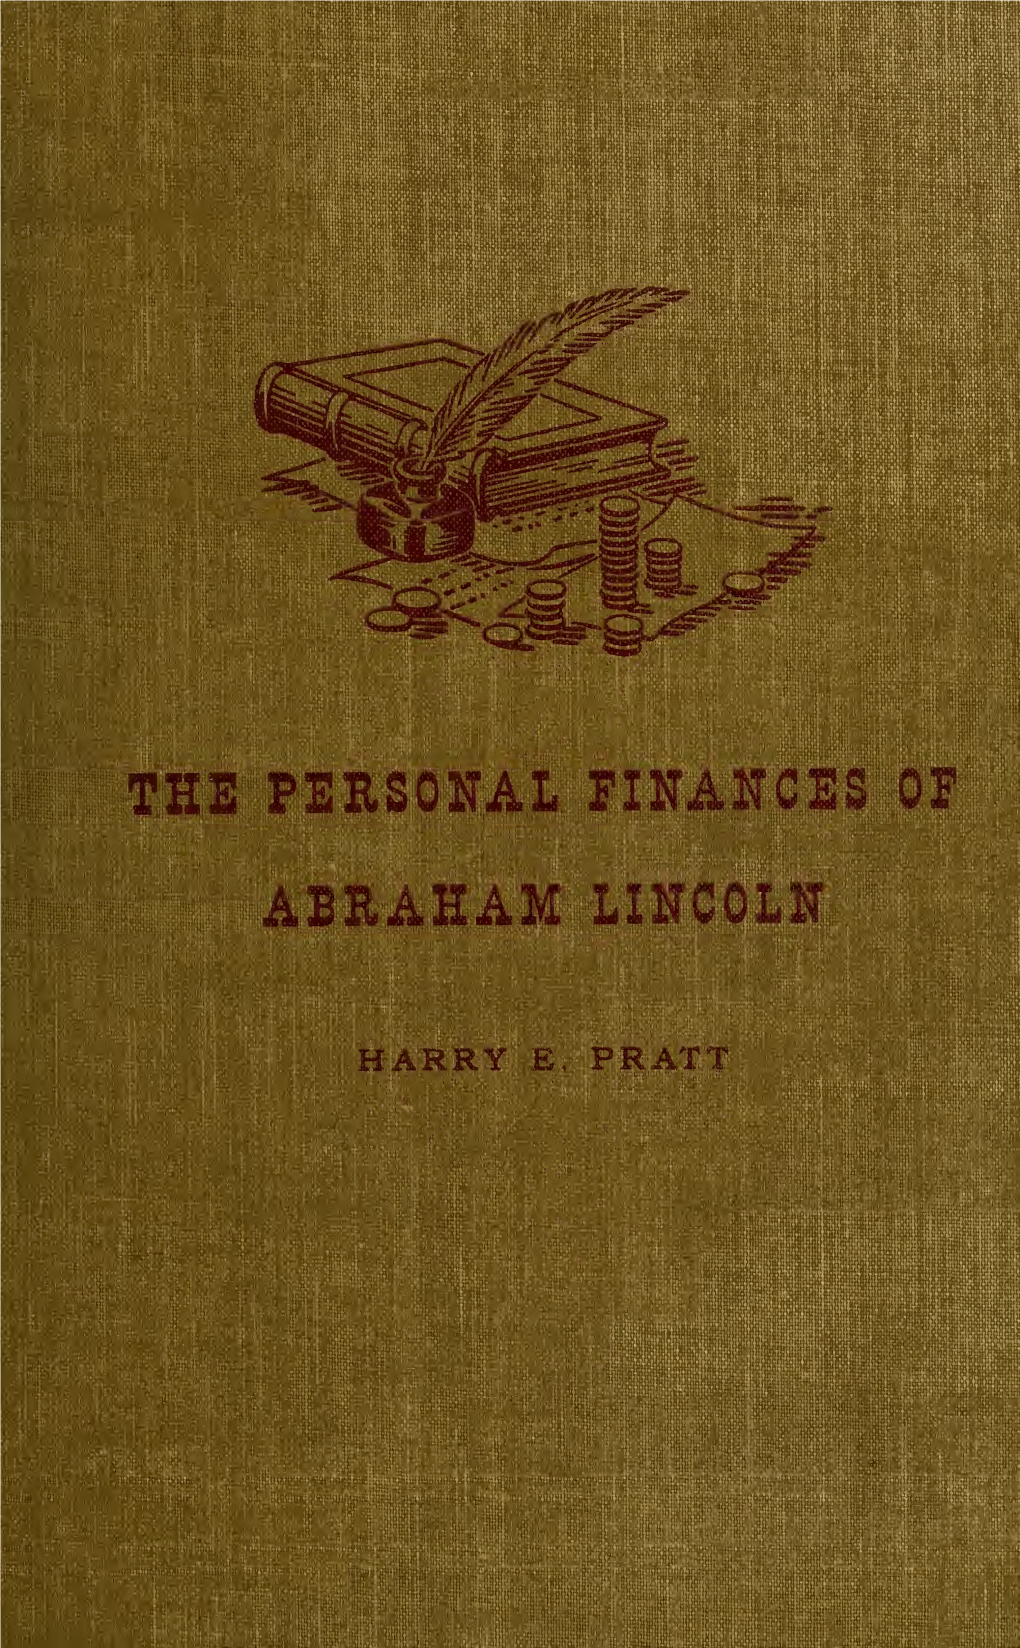 The Personal Finances of Abraham Lincoln